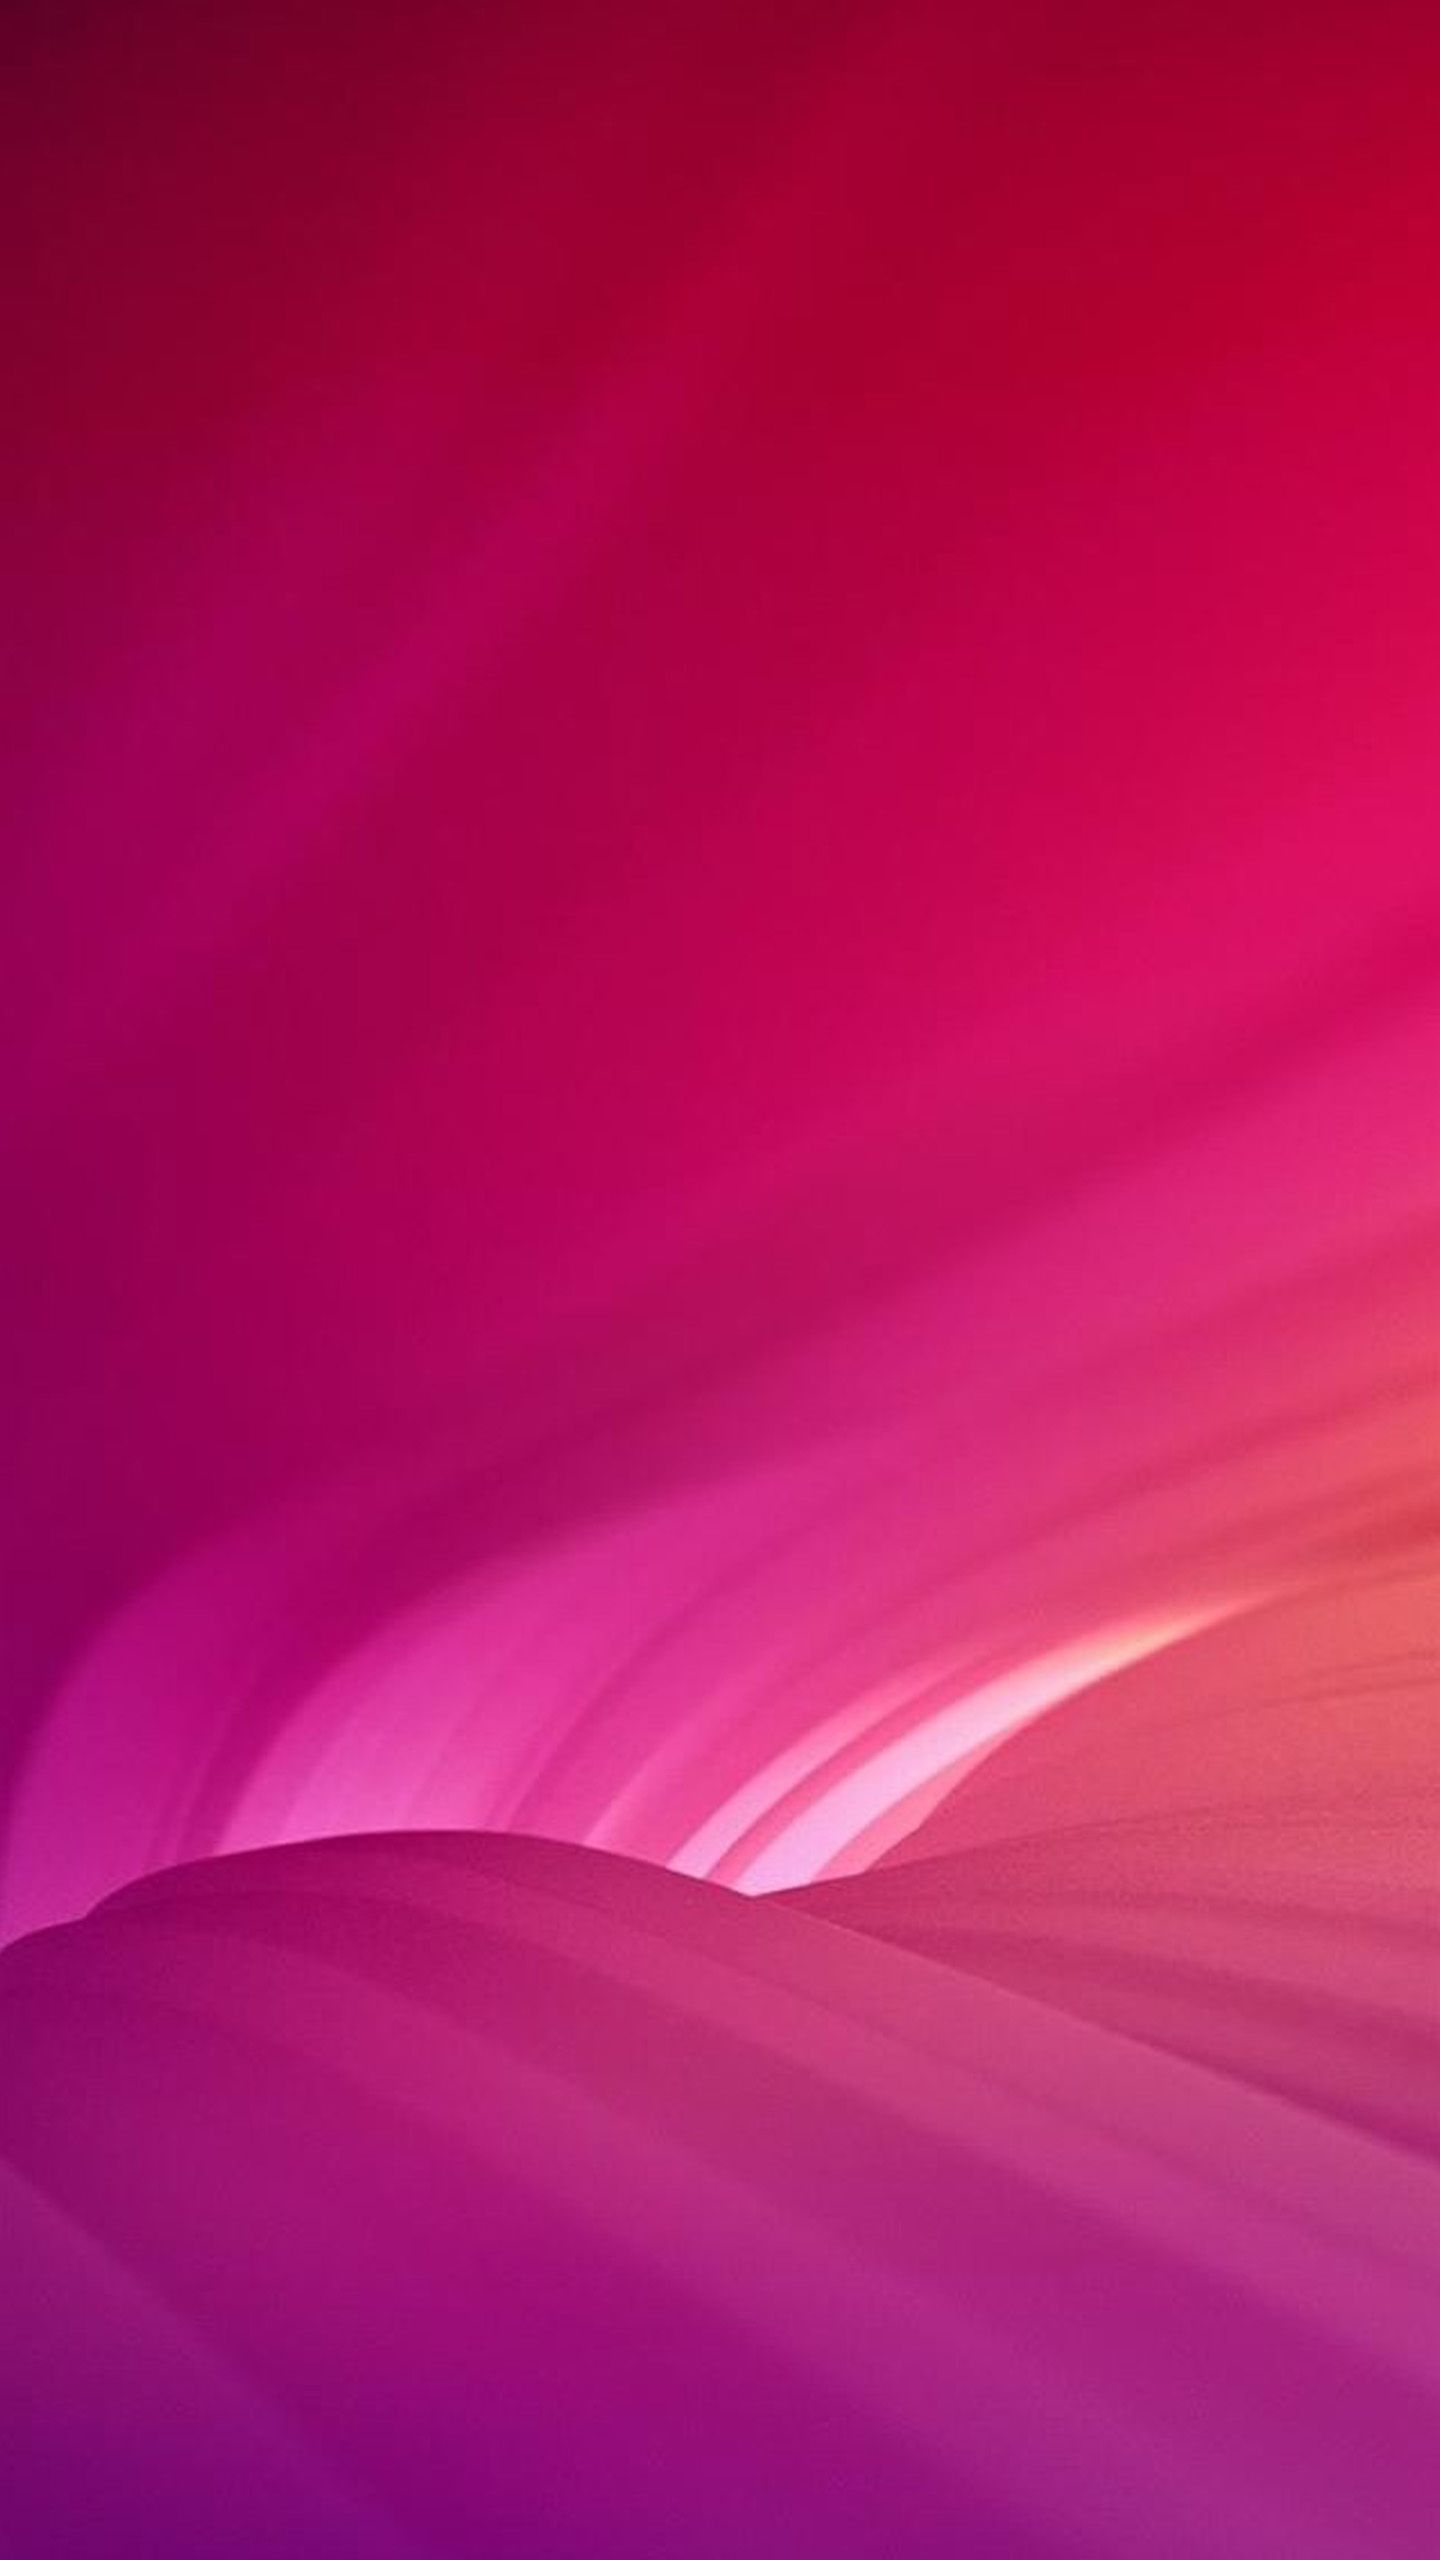 Galaxy Note 4 Wallpaper Free Galaxy Note 4 Background